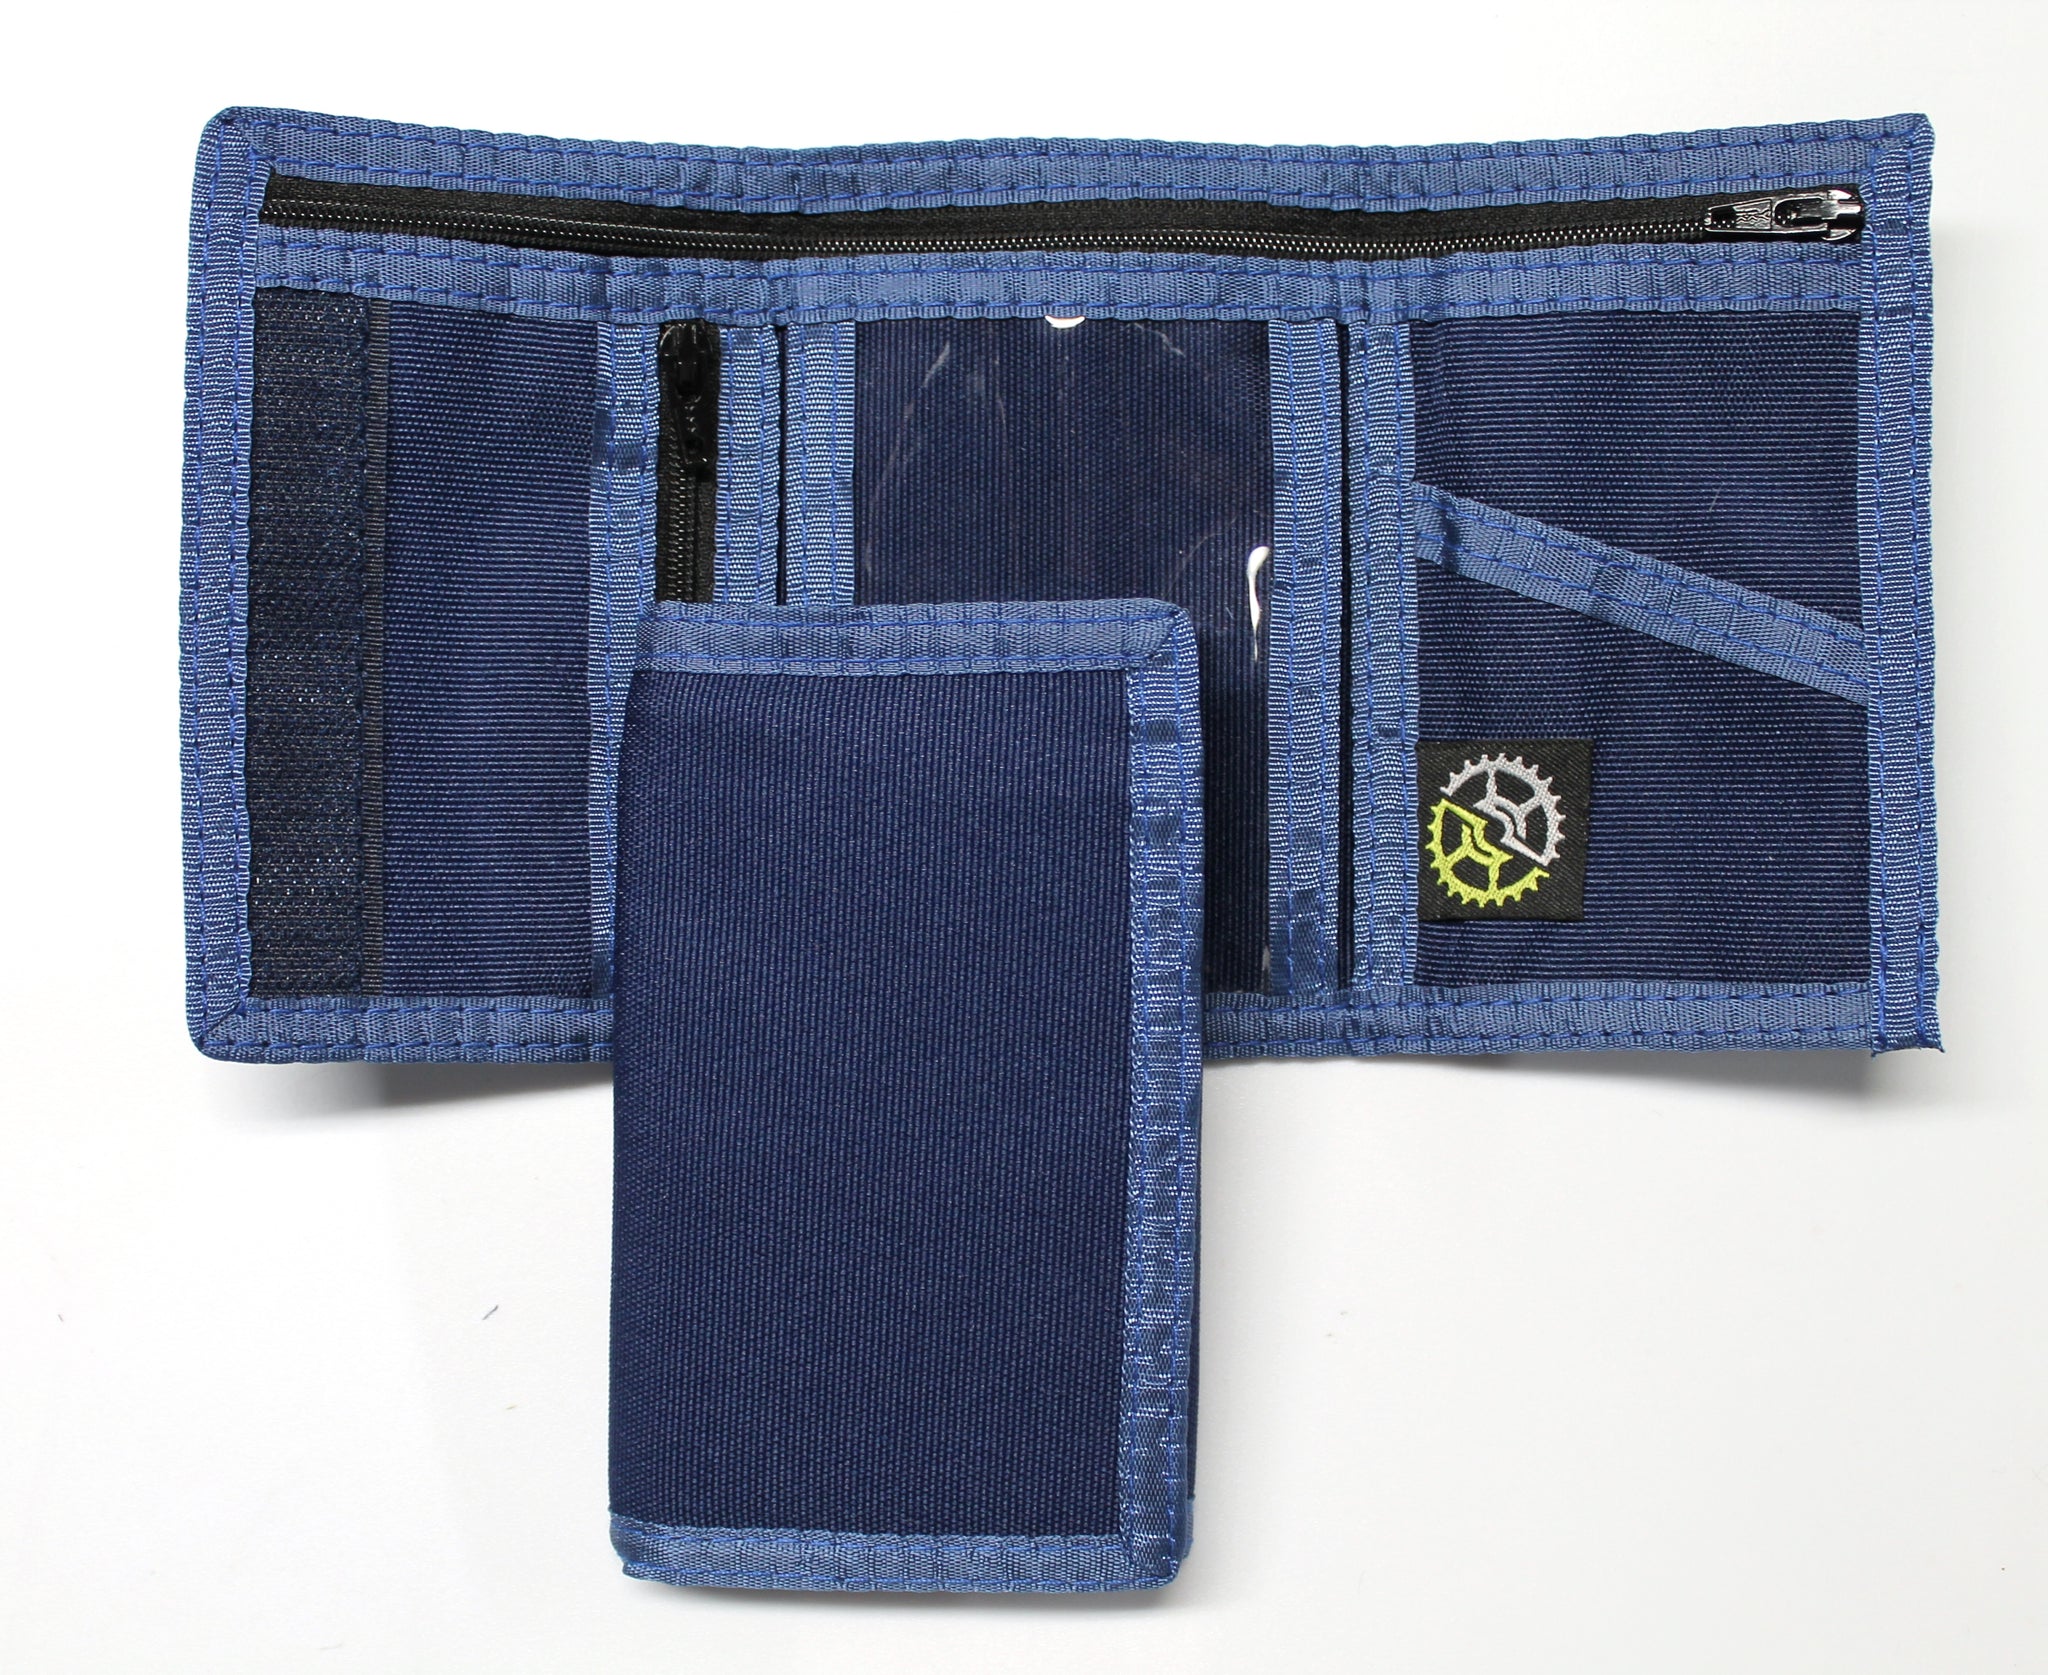 Nylon Trifold Wallet with Coin Pocket - Navy